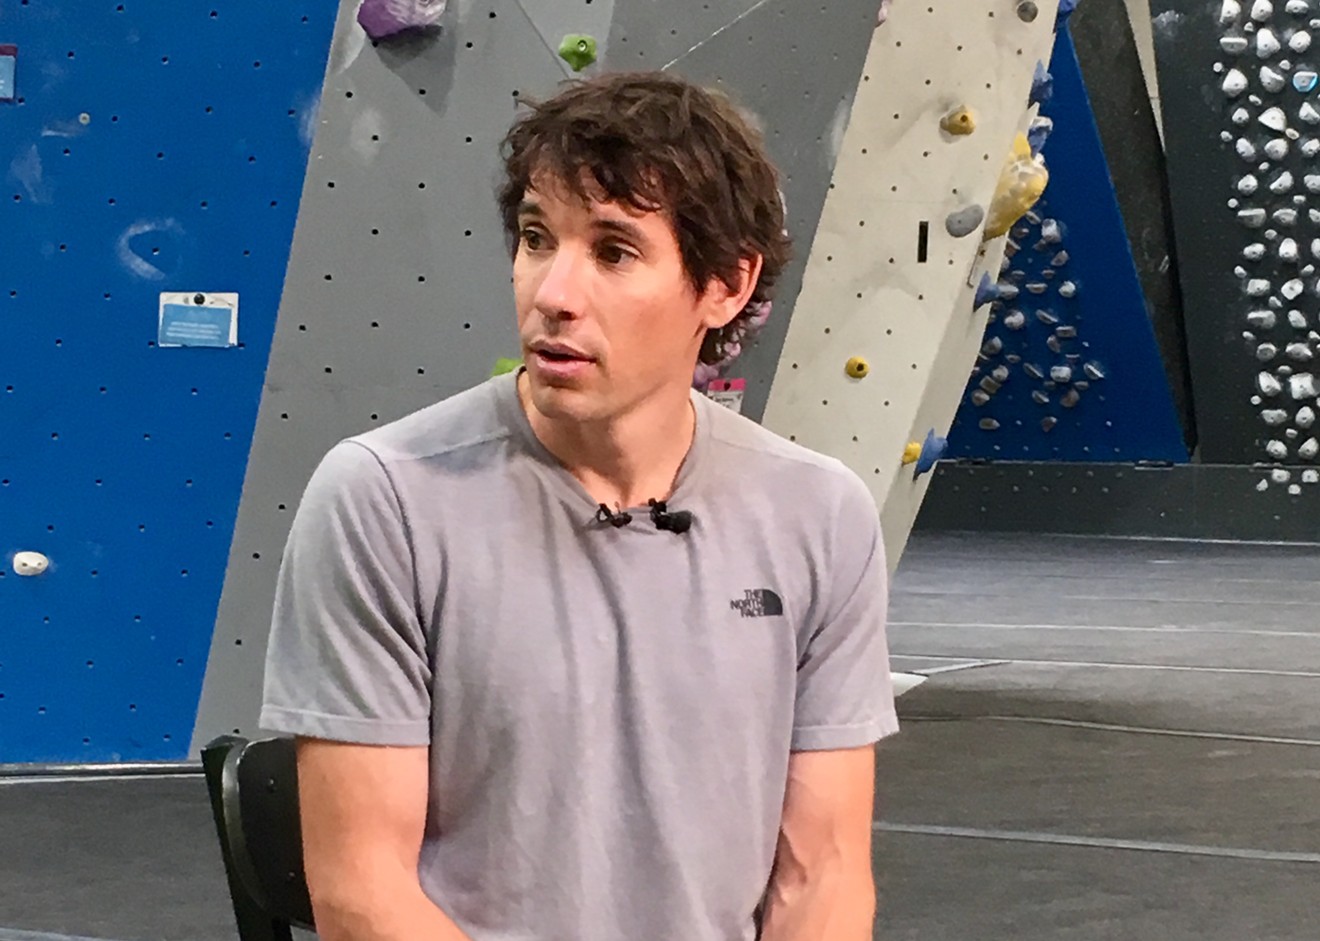 Alex Honnold at the Hang, a festival at Earth Treks in Englewood on Tuesday, June 18.